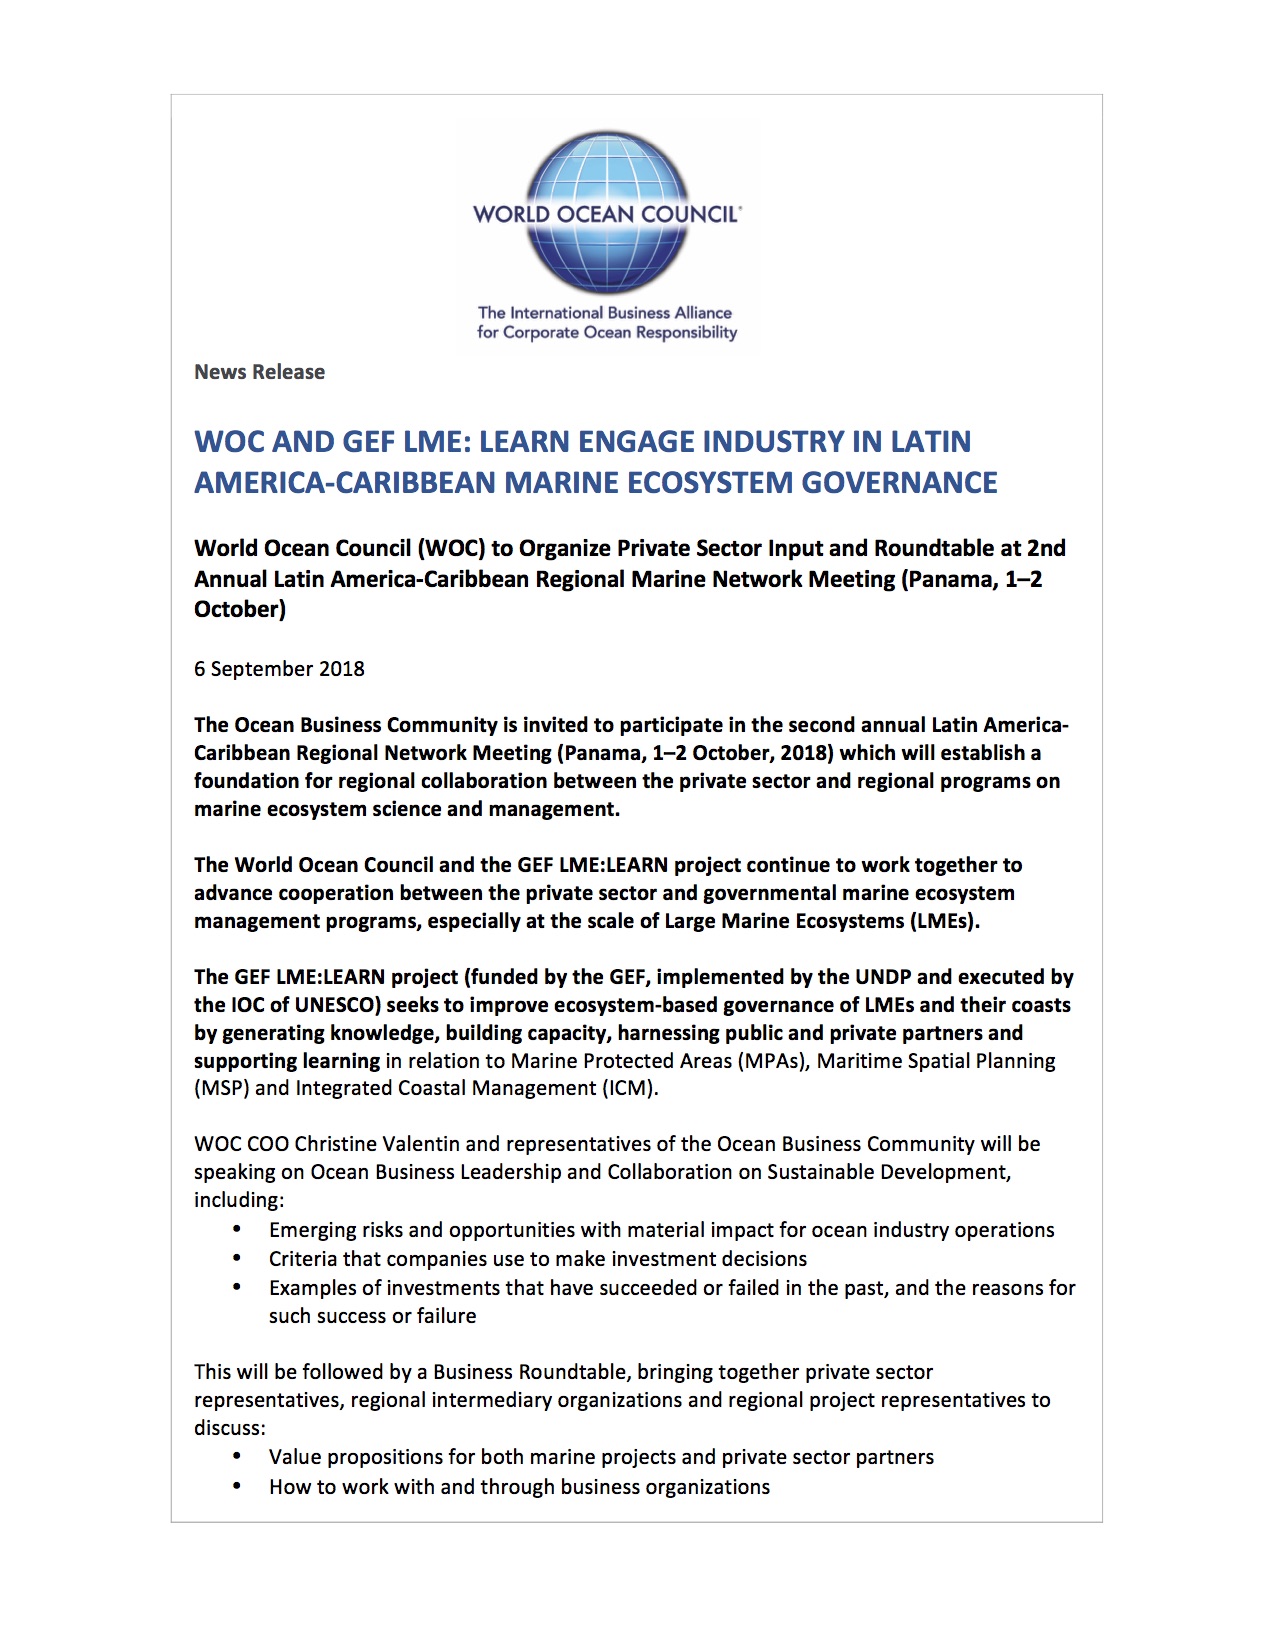 WOC and GEF LME:LEARN Engage Industry in Latin America-Caribbean Marine Ecosystem Governance - 6 September 2018